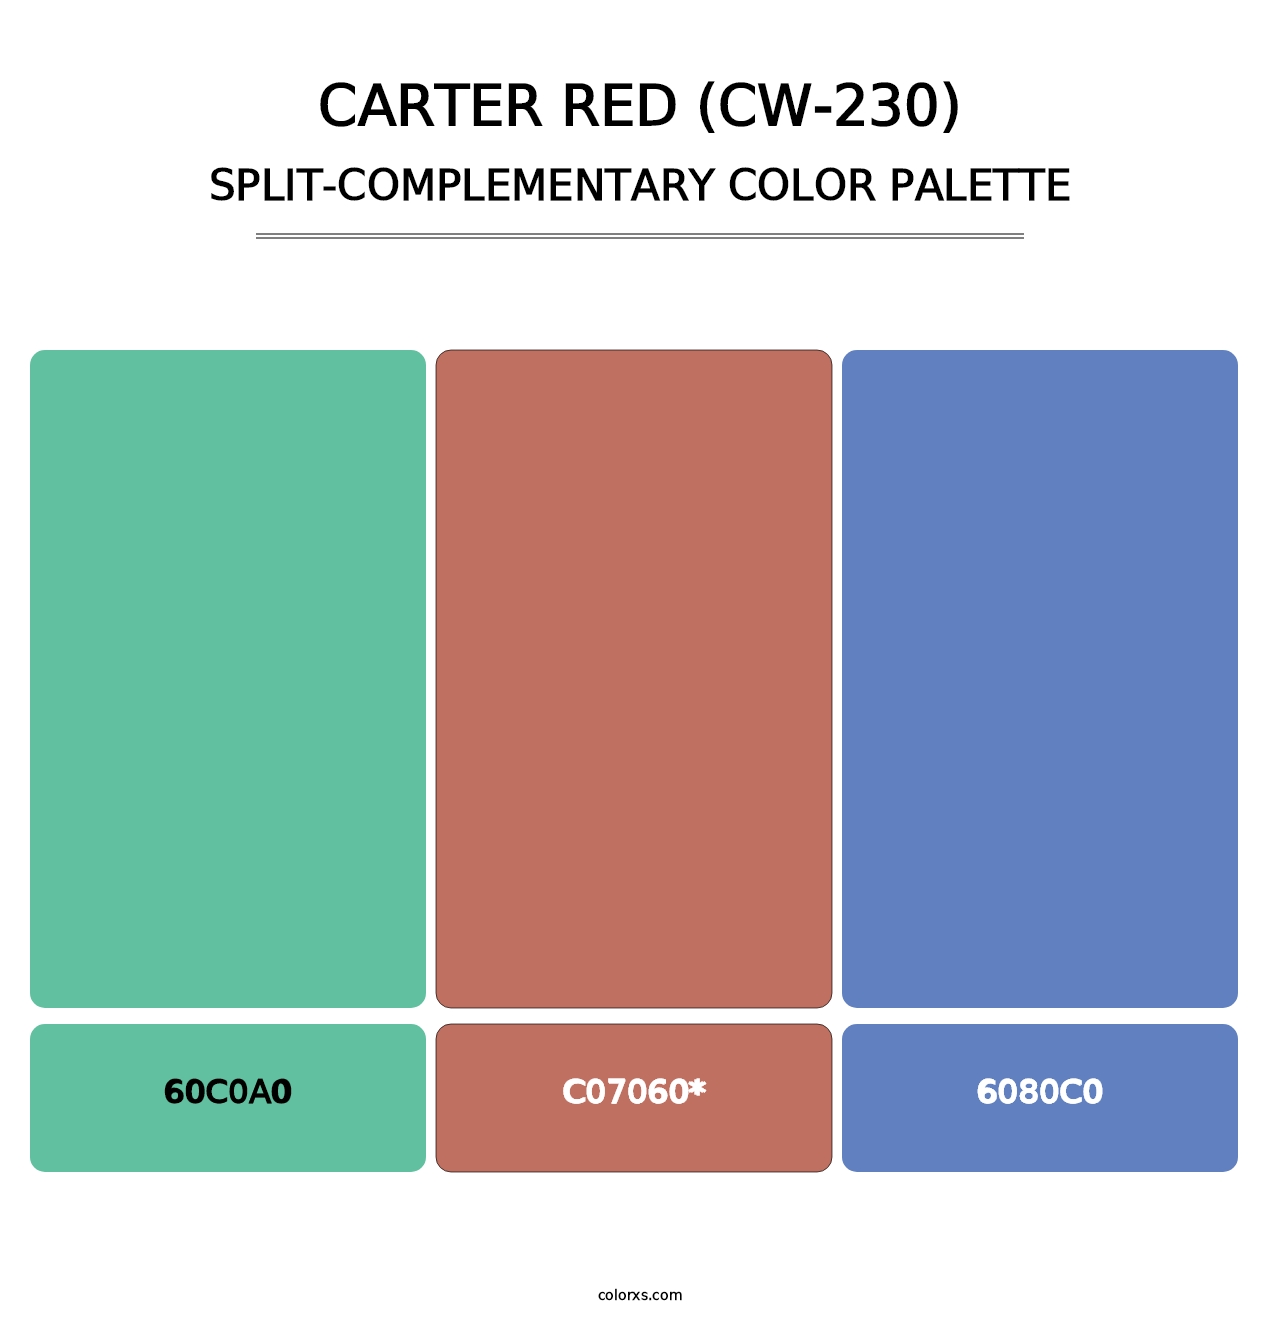 Carter Red (CW-230) - Split-Complementary Color Palette